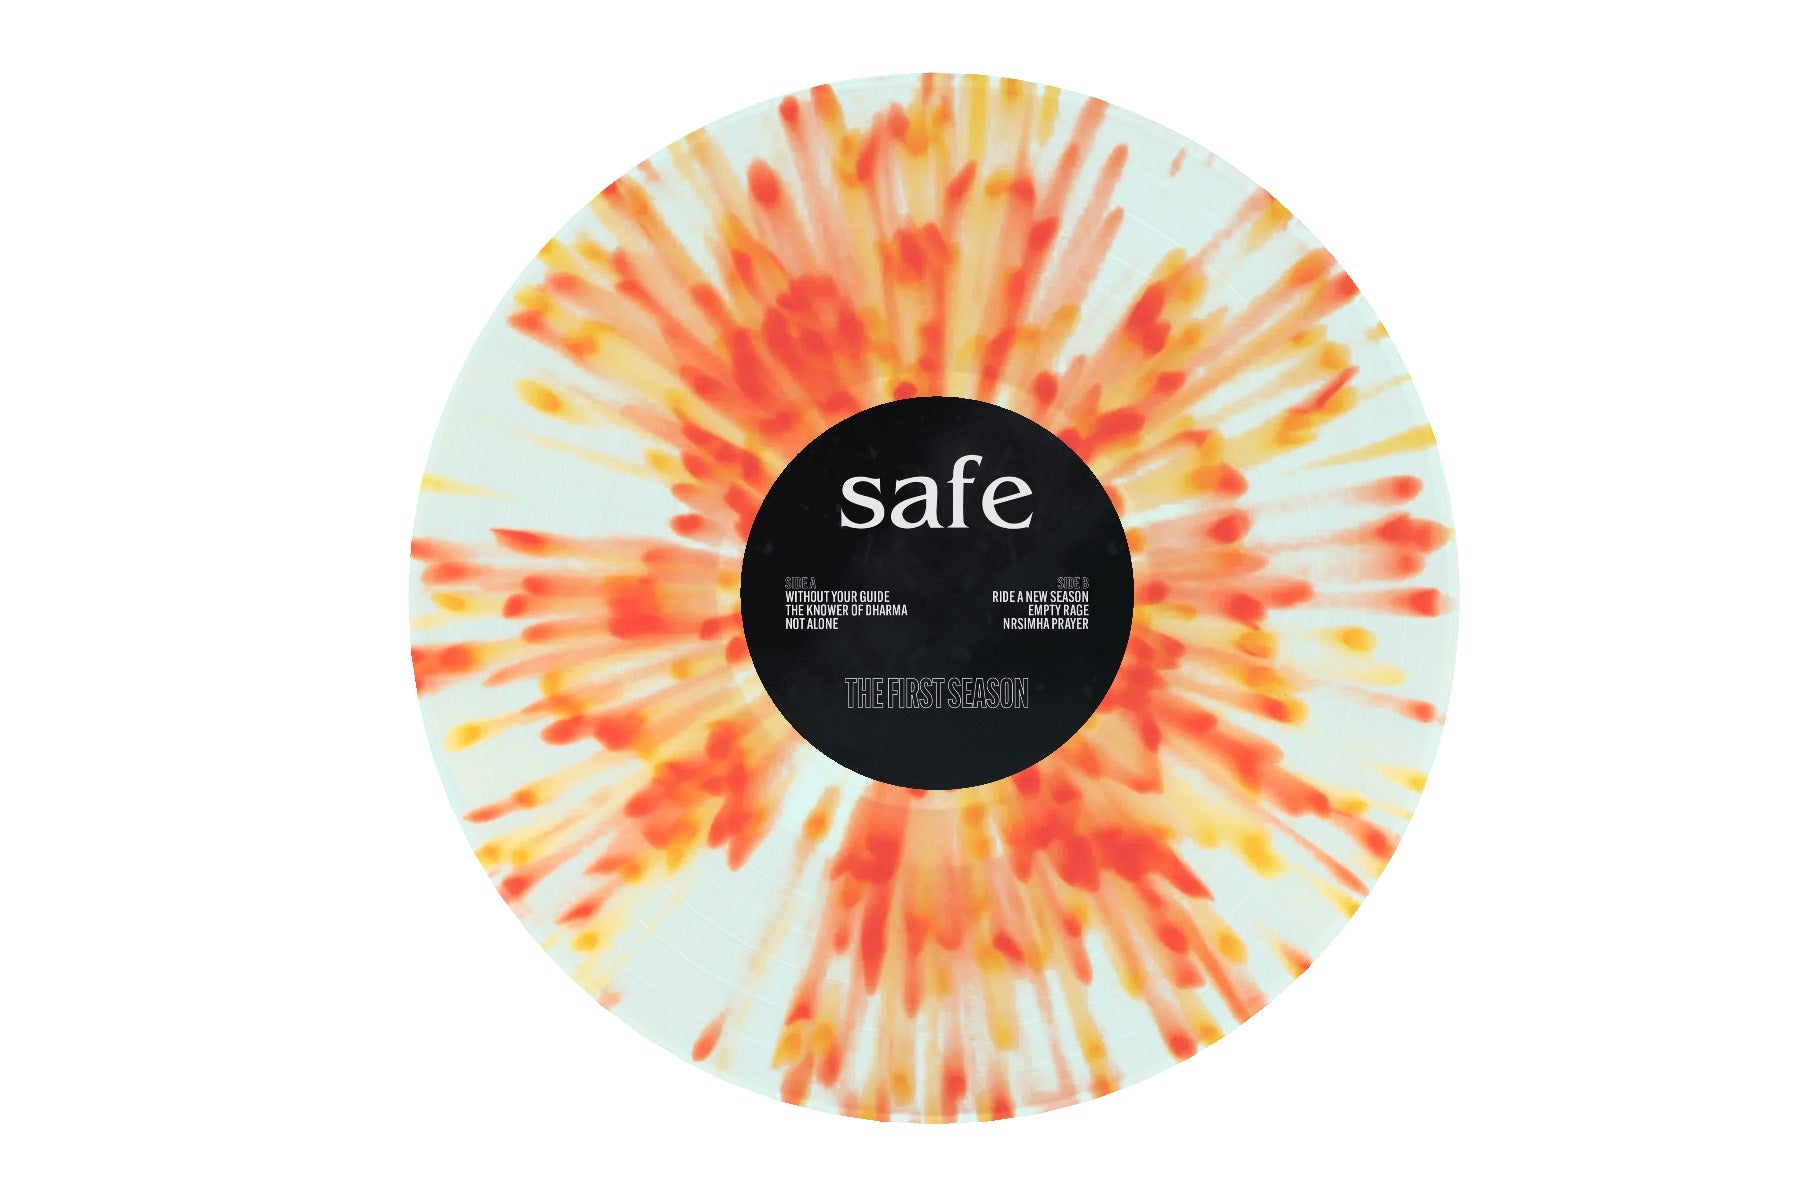 SAFE 'The Fist Season' 12" / COLORED EDITIONS